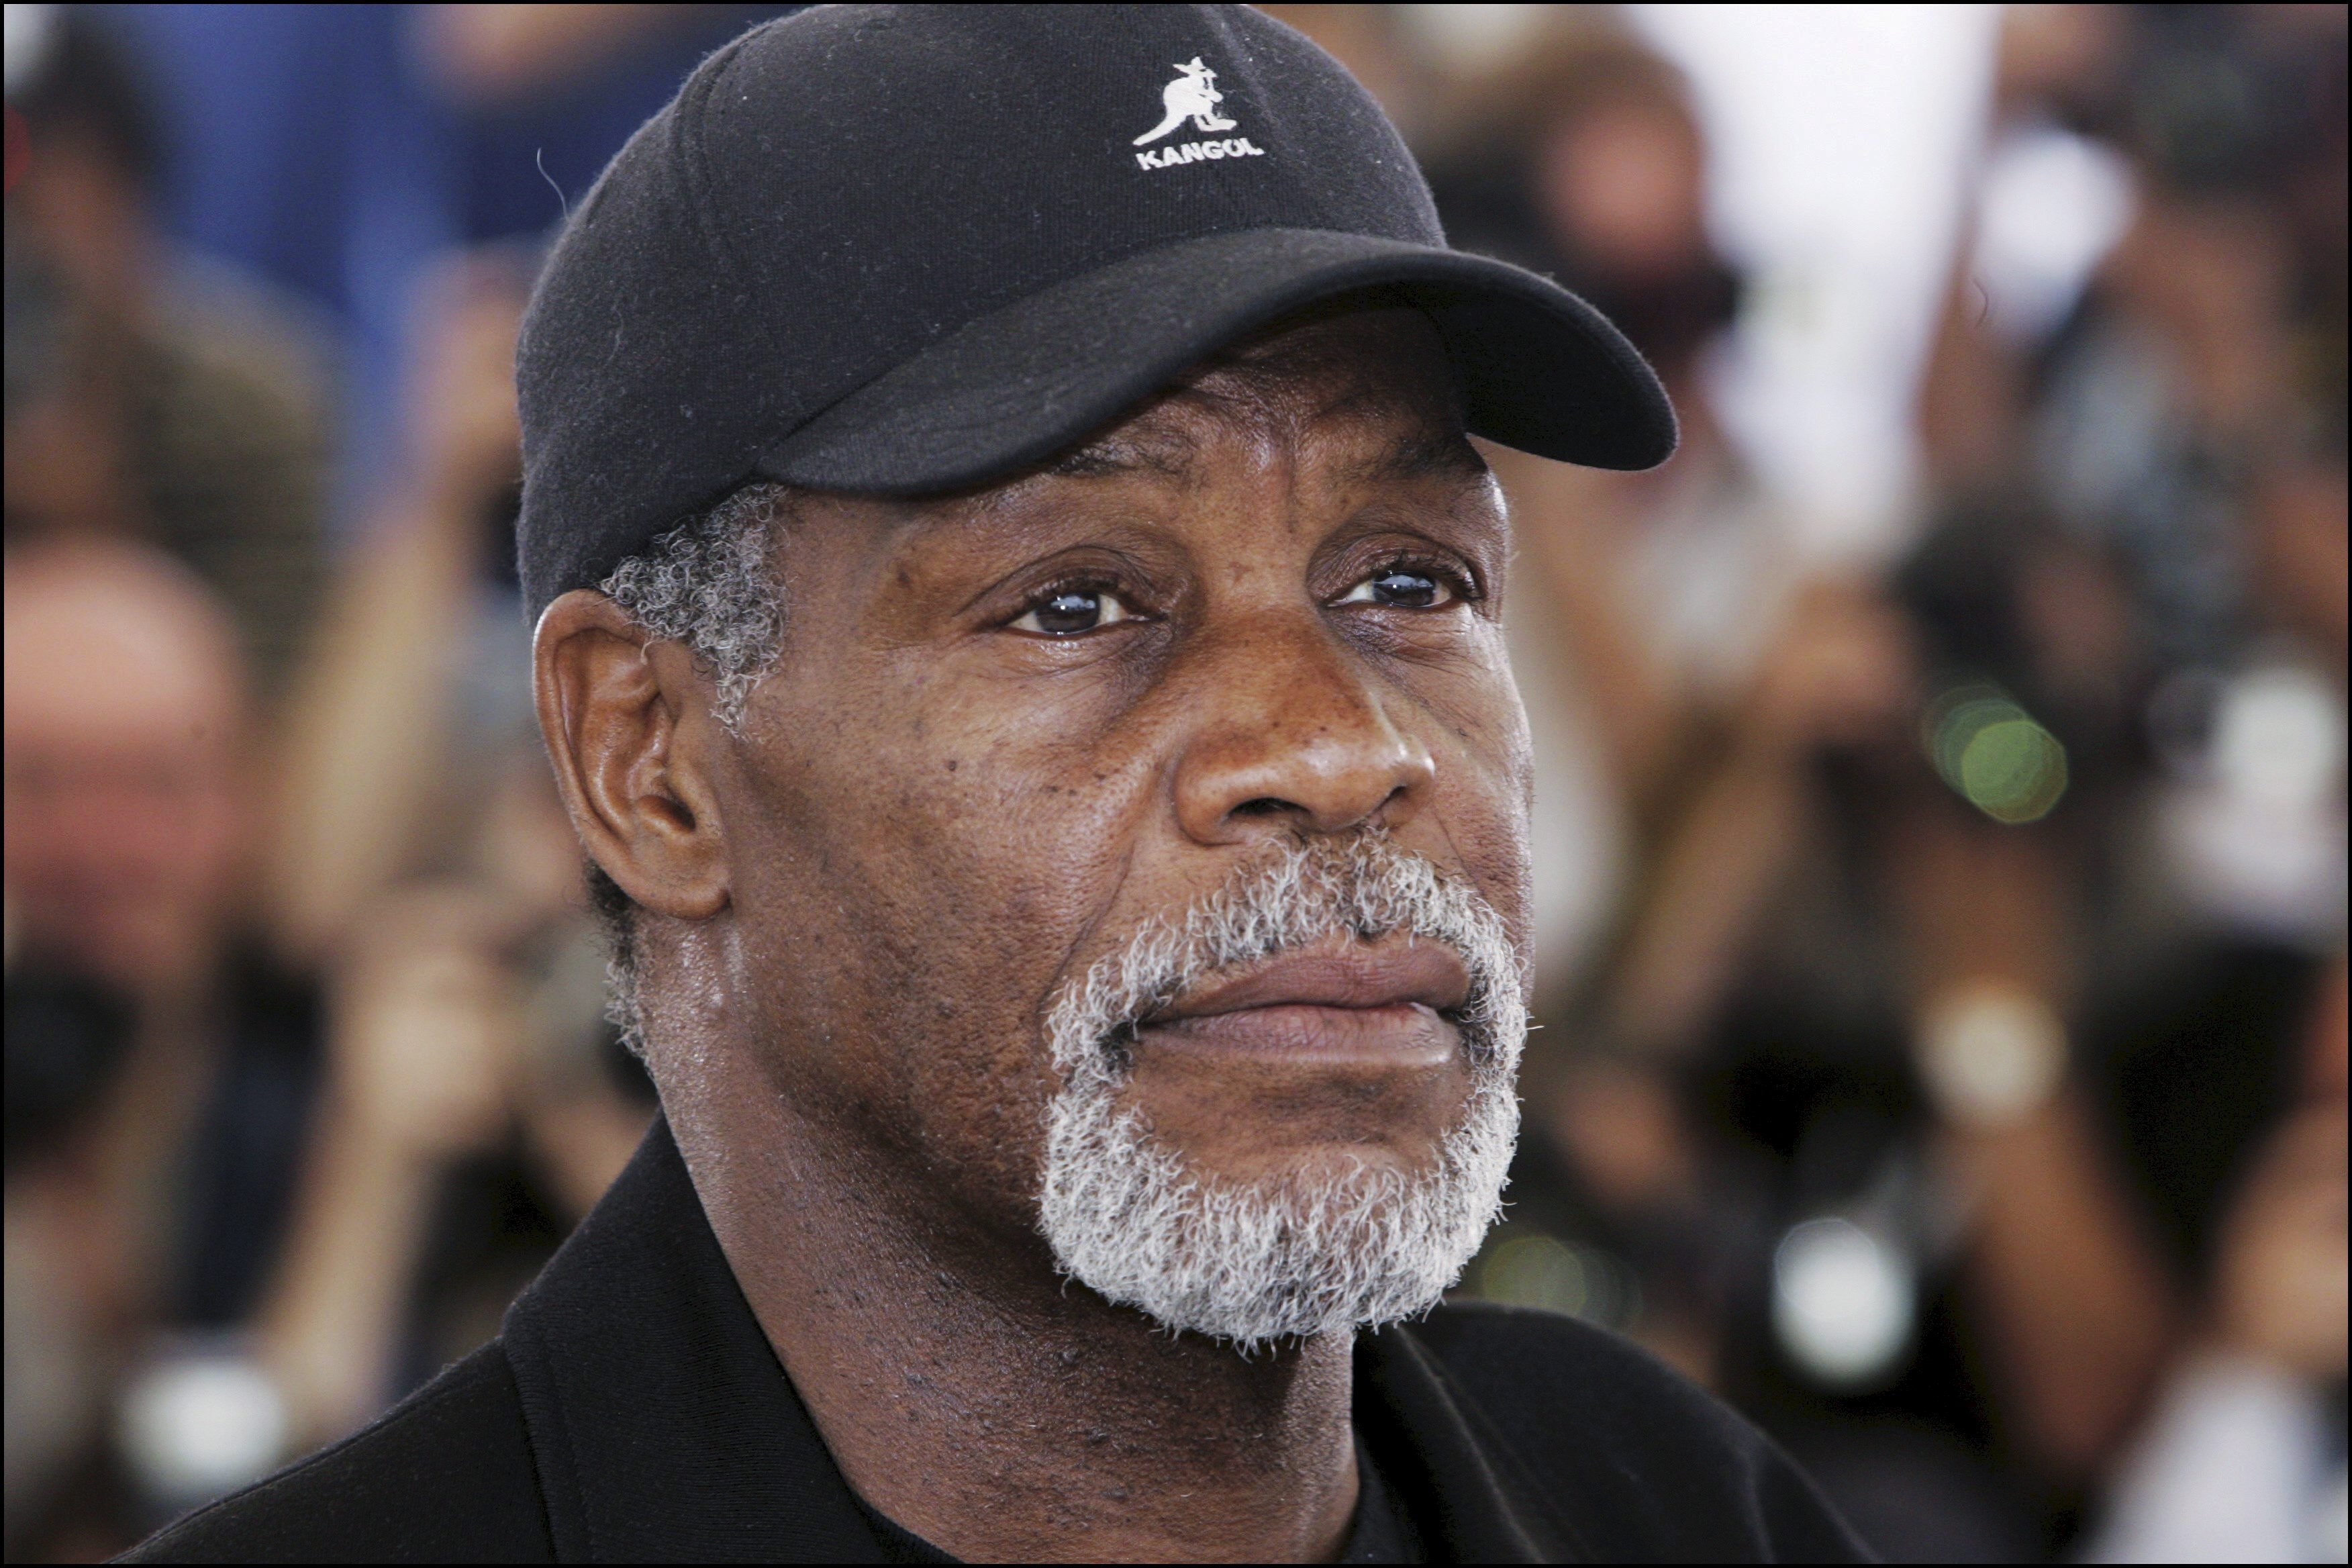 Danny Glover at the 58th Cannes Film Festival: Photo-call of "Manderlay" in Cannes, France, on May 16, 2005. | Source: Pool Benainous/Catarina/Legrand/Gamma-Rapho/Getty Images